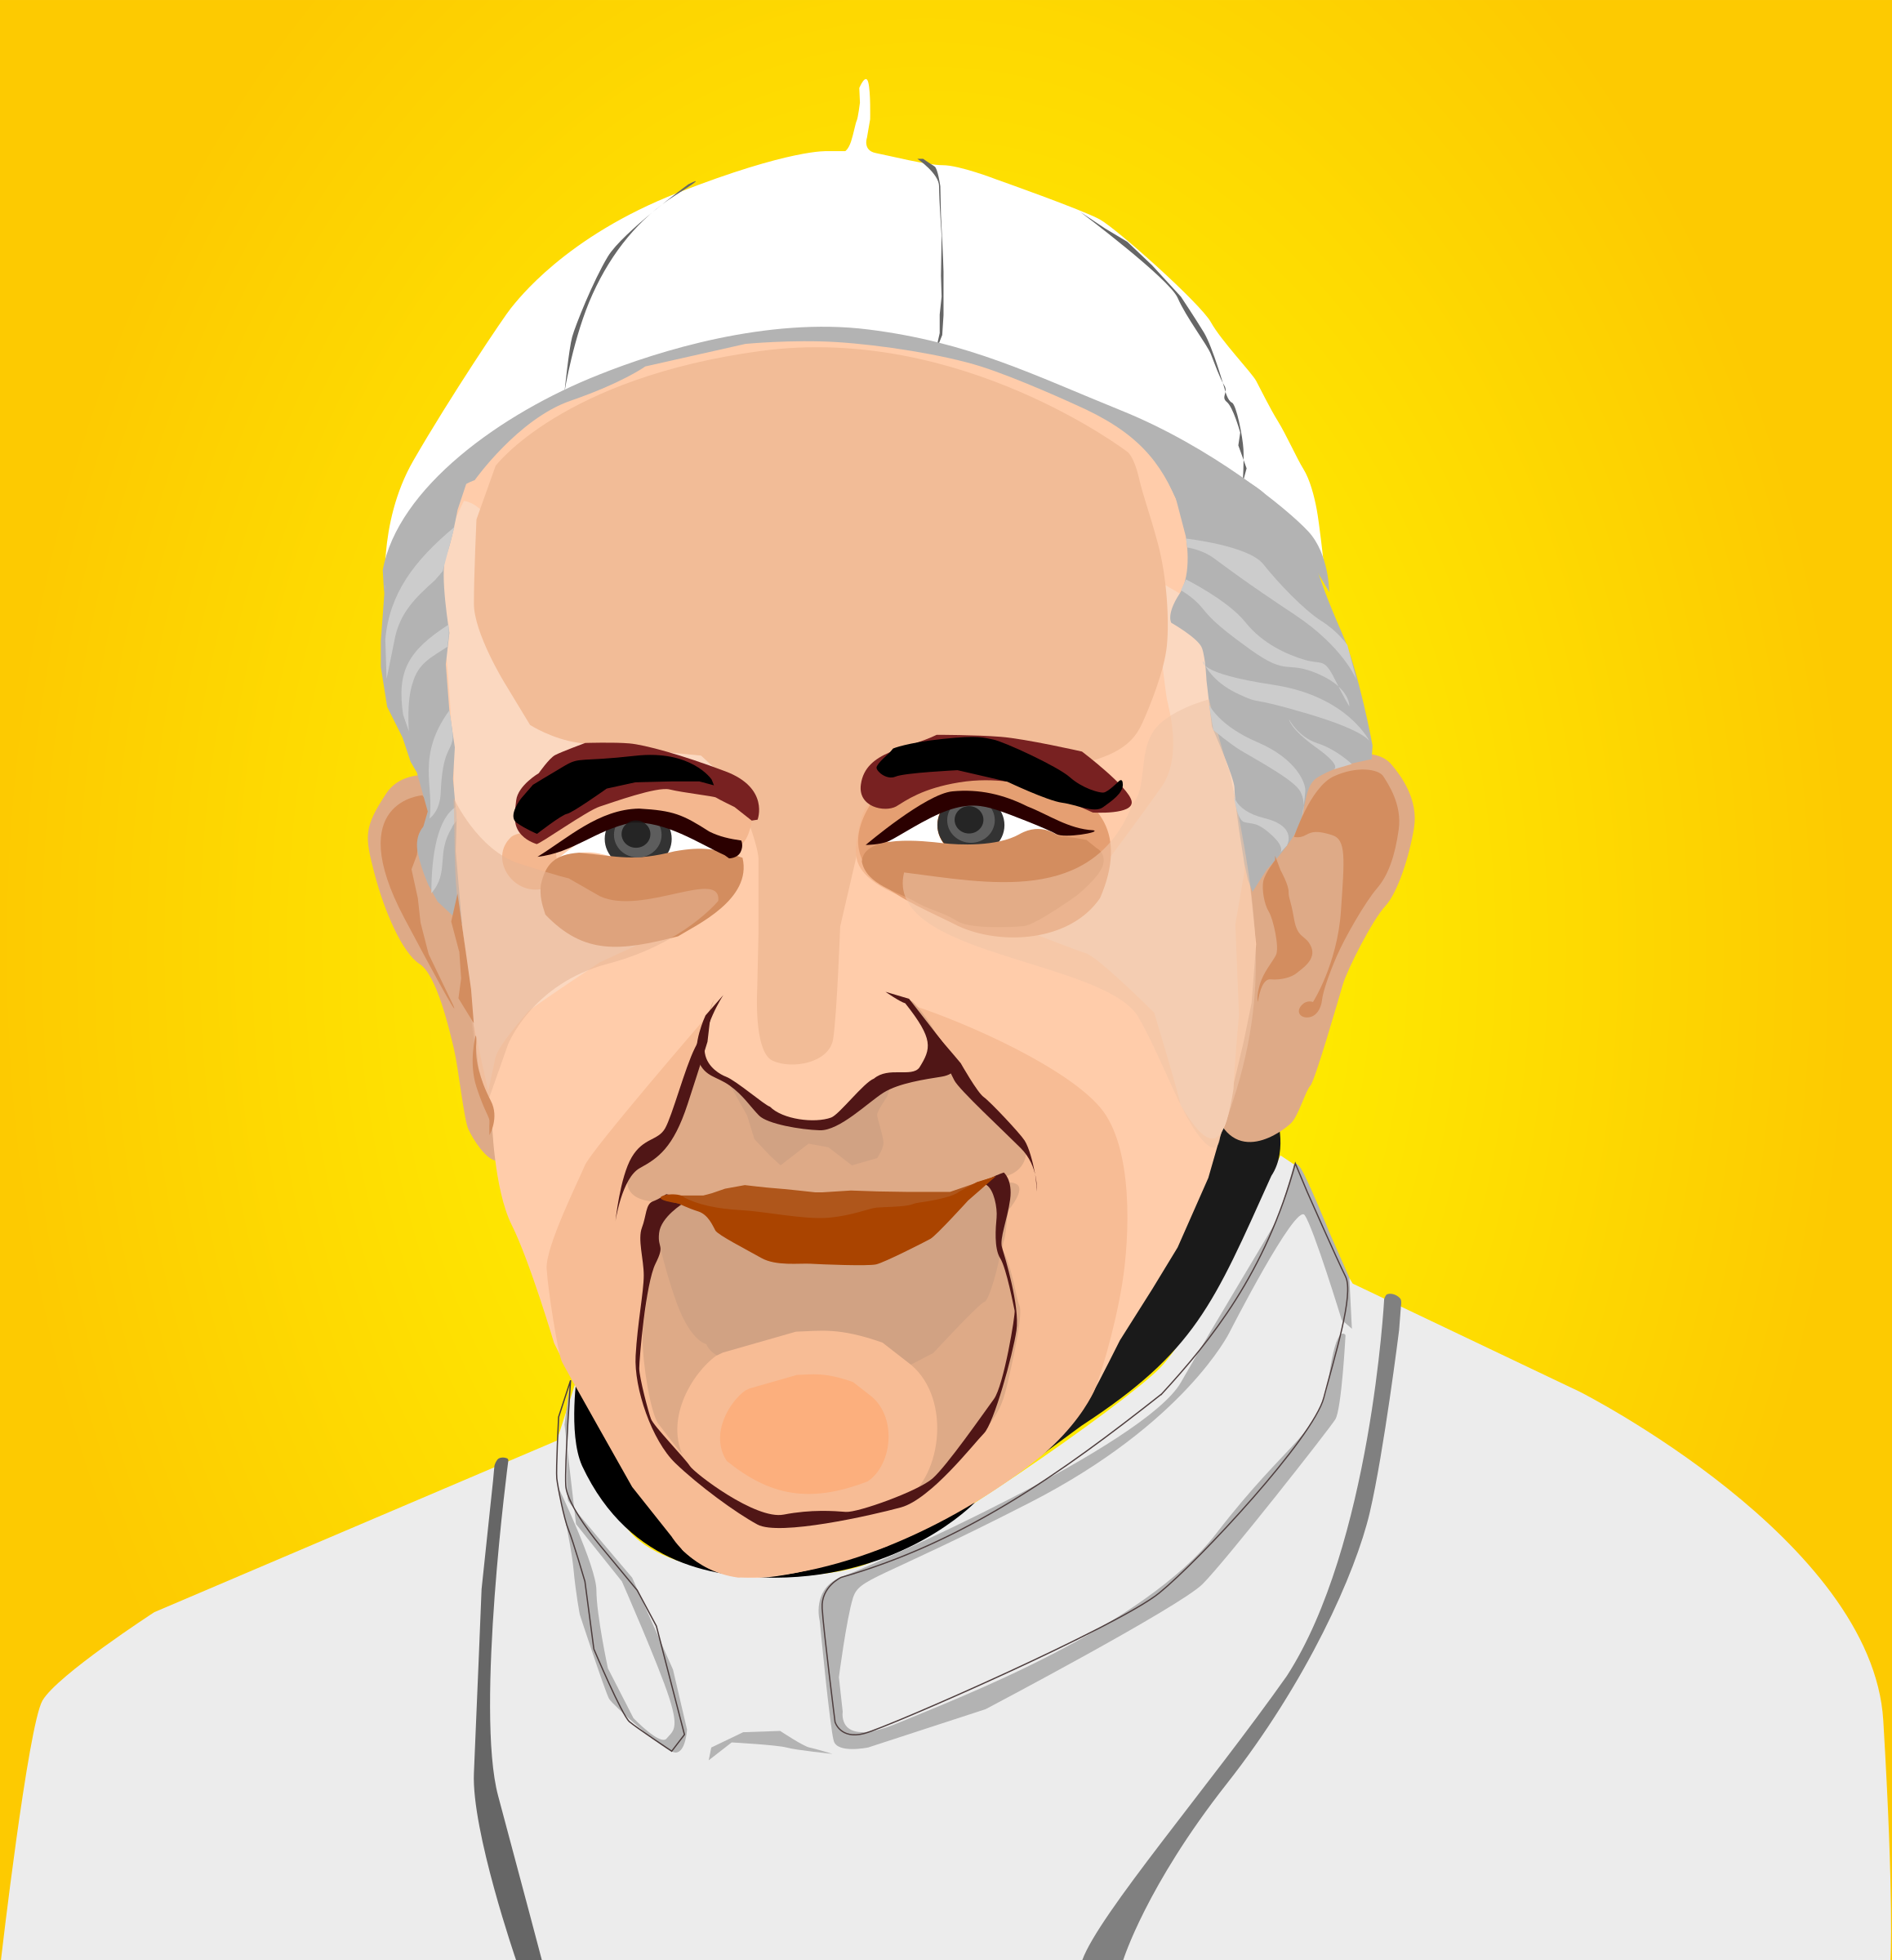 Clipart Of Pope Francis - Pope Francis, Transparent background PNG HD thumbnail